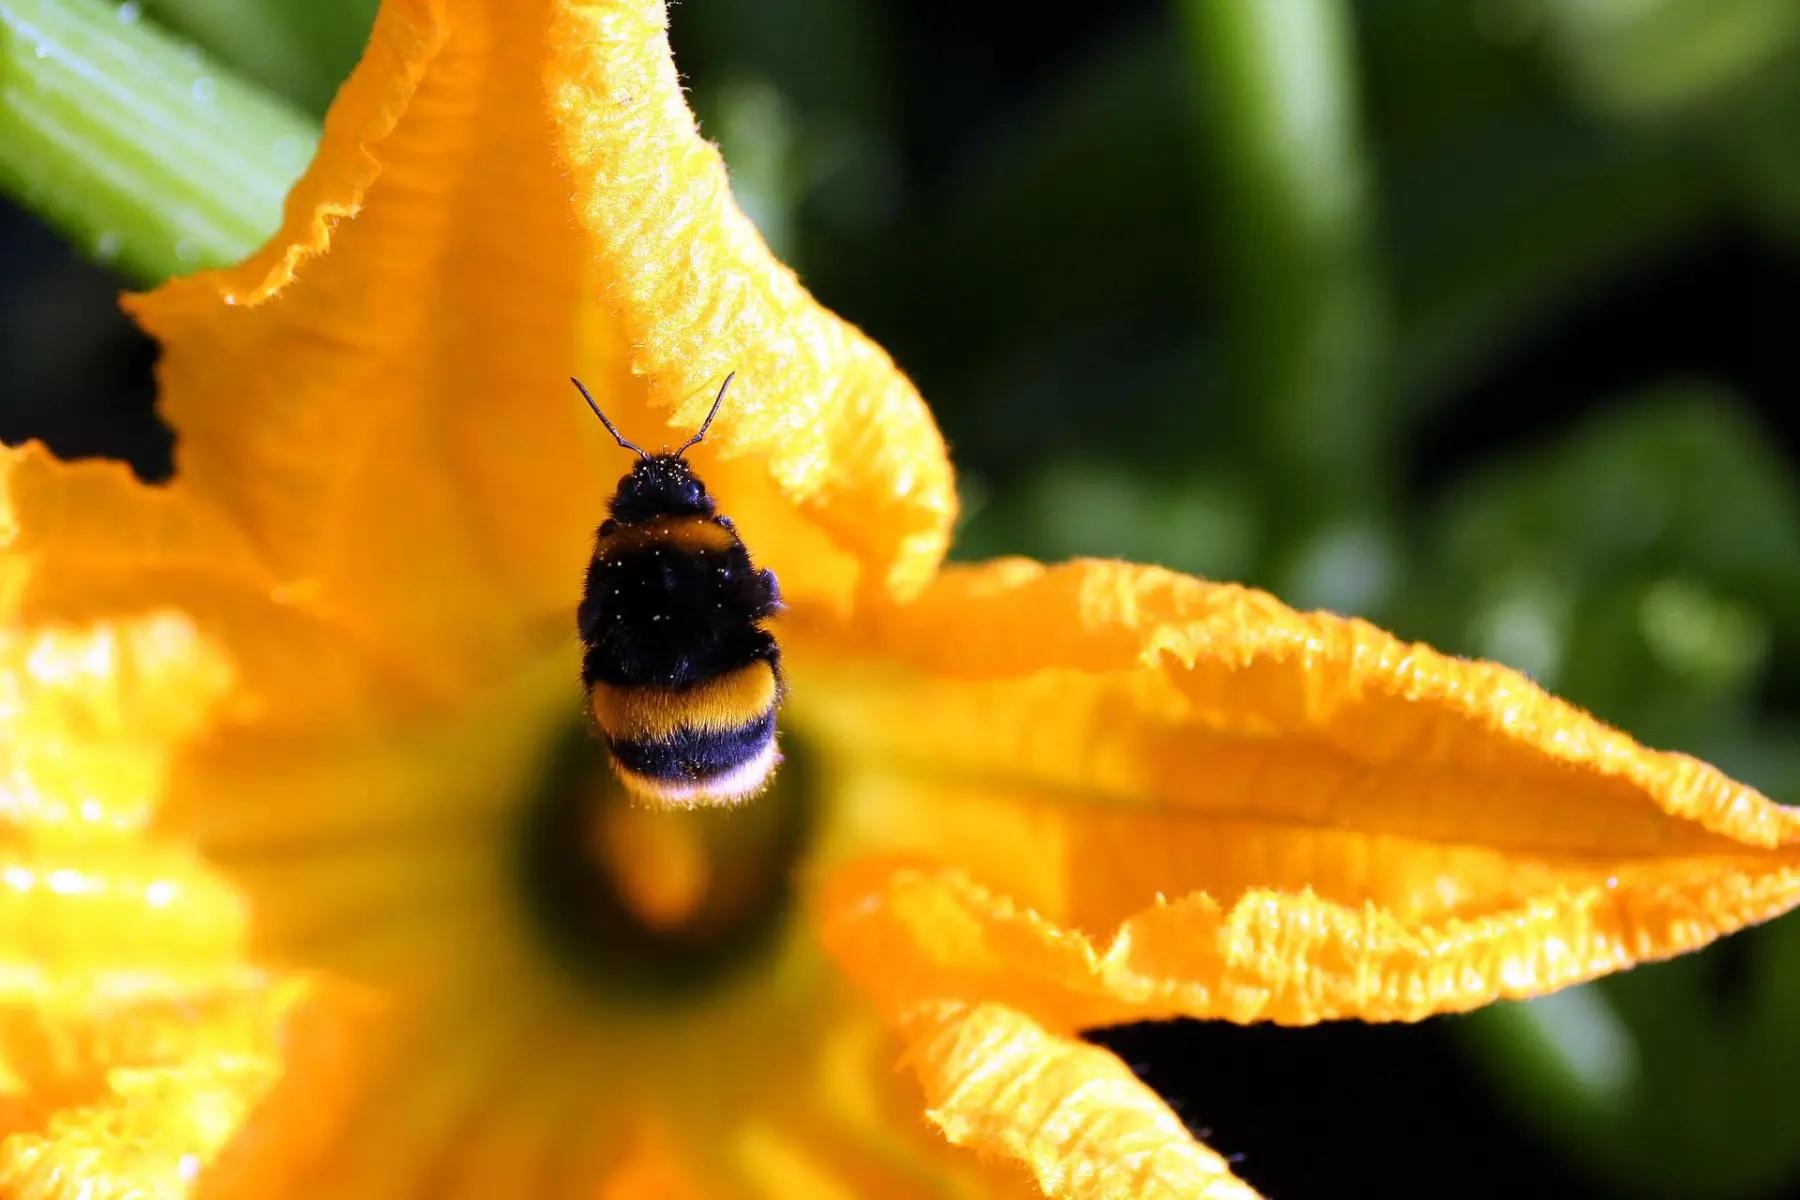 bee on a yellow squash flower - climate change affects pollination